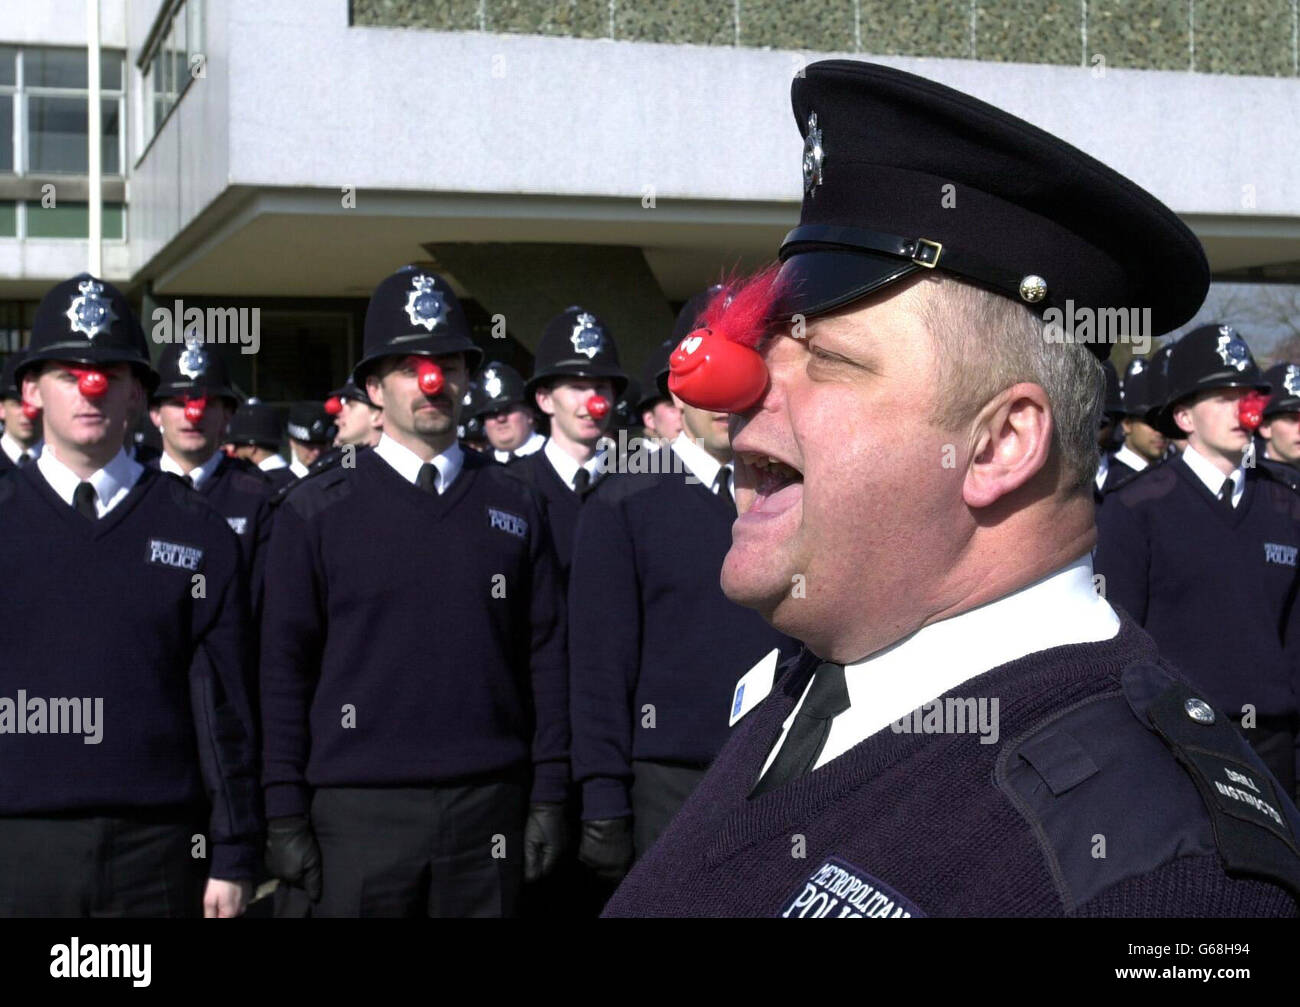 Drill instuctor Peter Clements from Stevenage in charge of police recruits wearing red noses in a rehearsal for their passing out parade on Friday March 14 2003 at Hendon Training School, North London. *..The new recruits have undertaken a range of activities to raise more than 7,000 for a local charity, North London Hospice. Charity events included a sponsered diet and a Cadbury's Creme Egg Eat-a-thon. Stock Photo